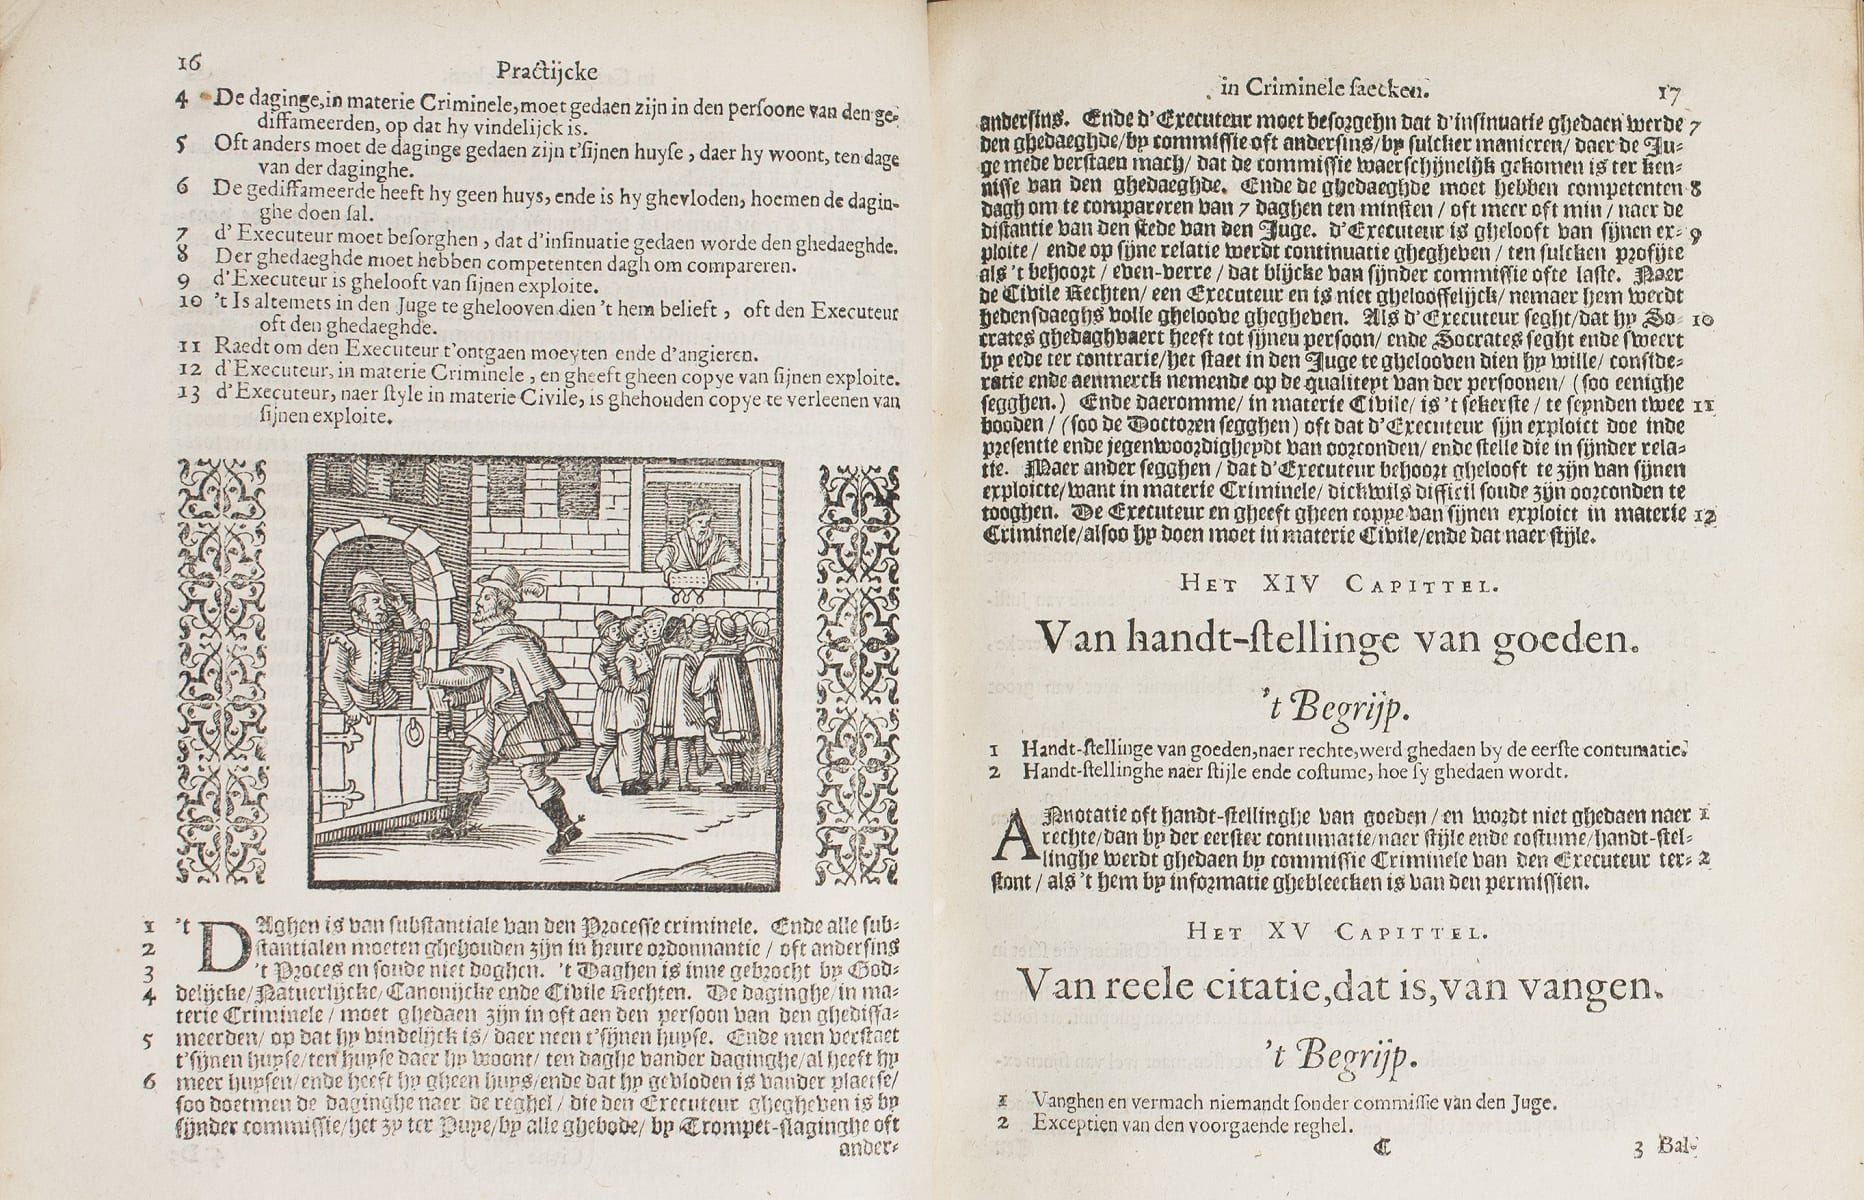 Two-page spread in Latin with illustration of two men talking. Links to larger version of this image.